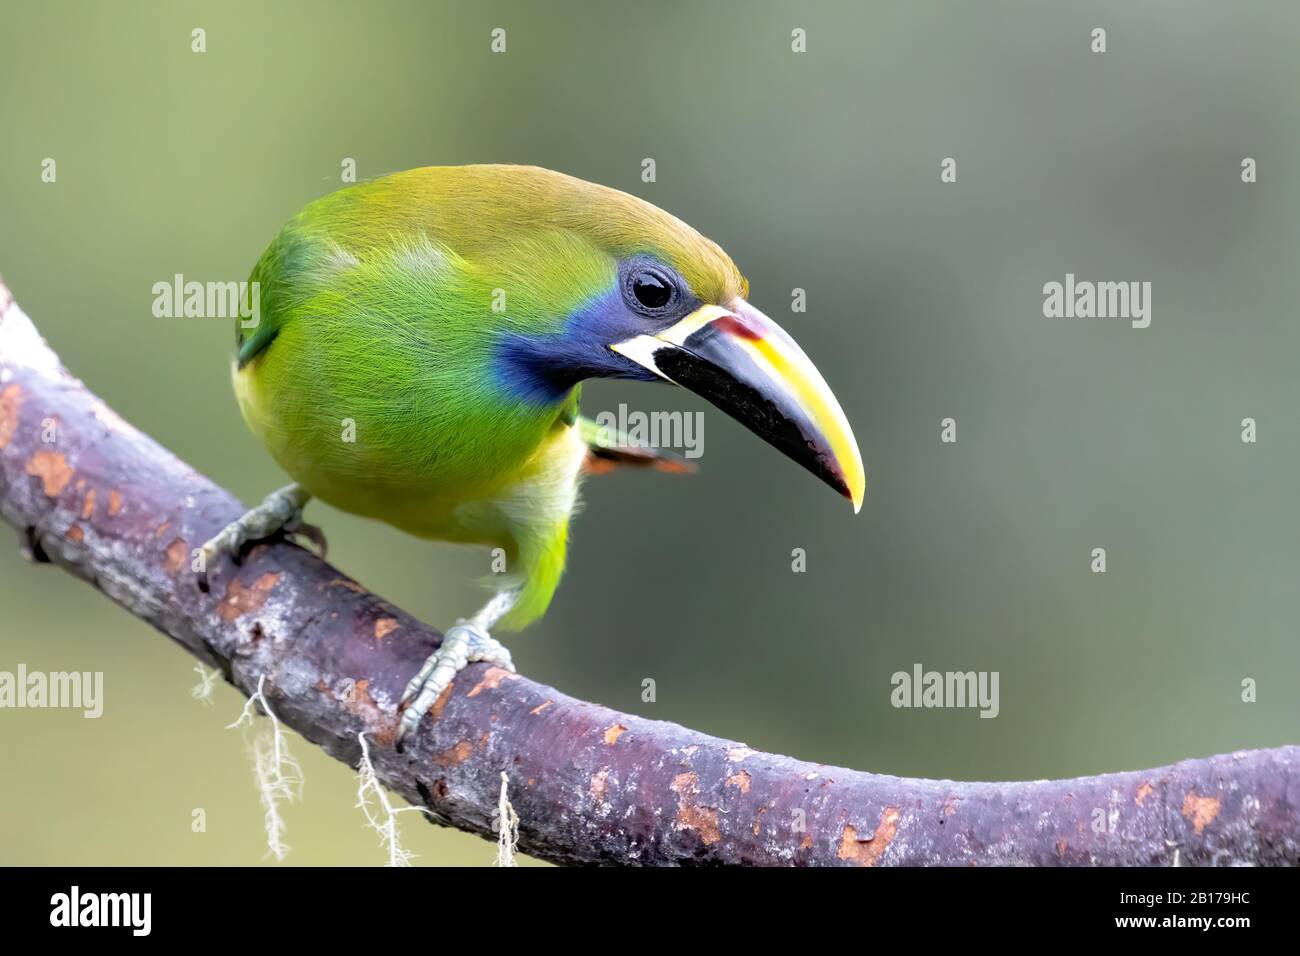 A Blue-throated toucanet (Aulacorhynchus caeruleogularis) in the Talamanca mountains of Costa Rica. This toucan nests in old woodpecker holes. Stock Photo